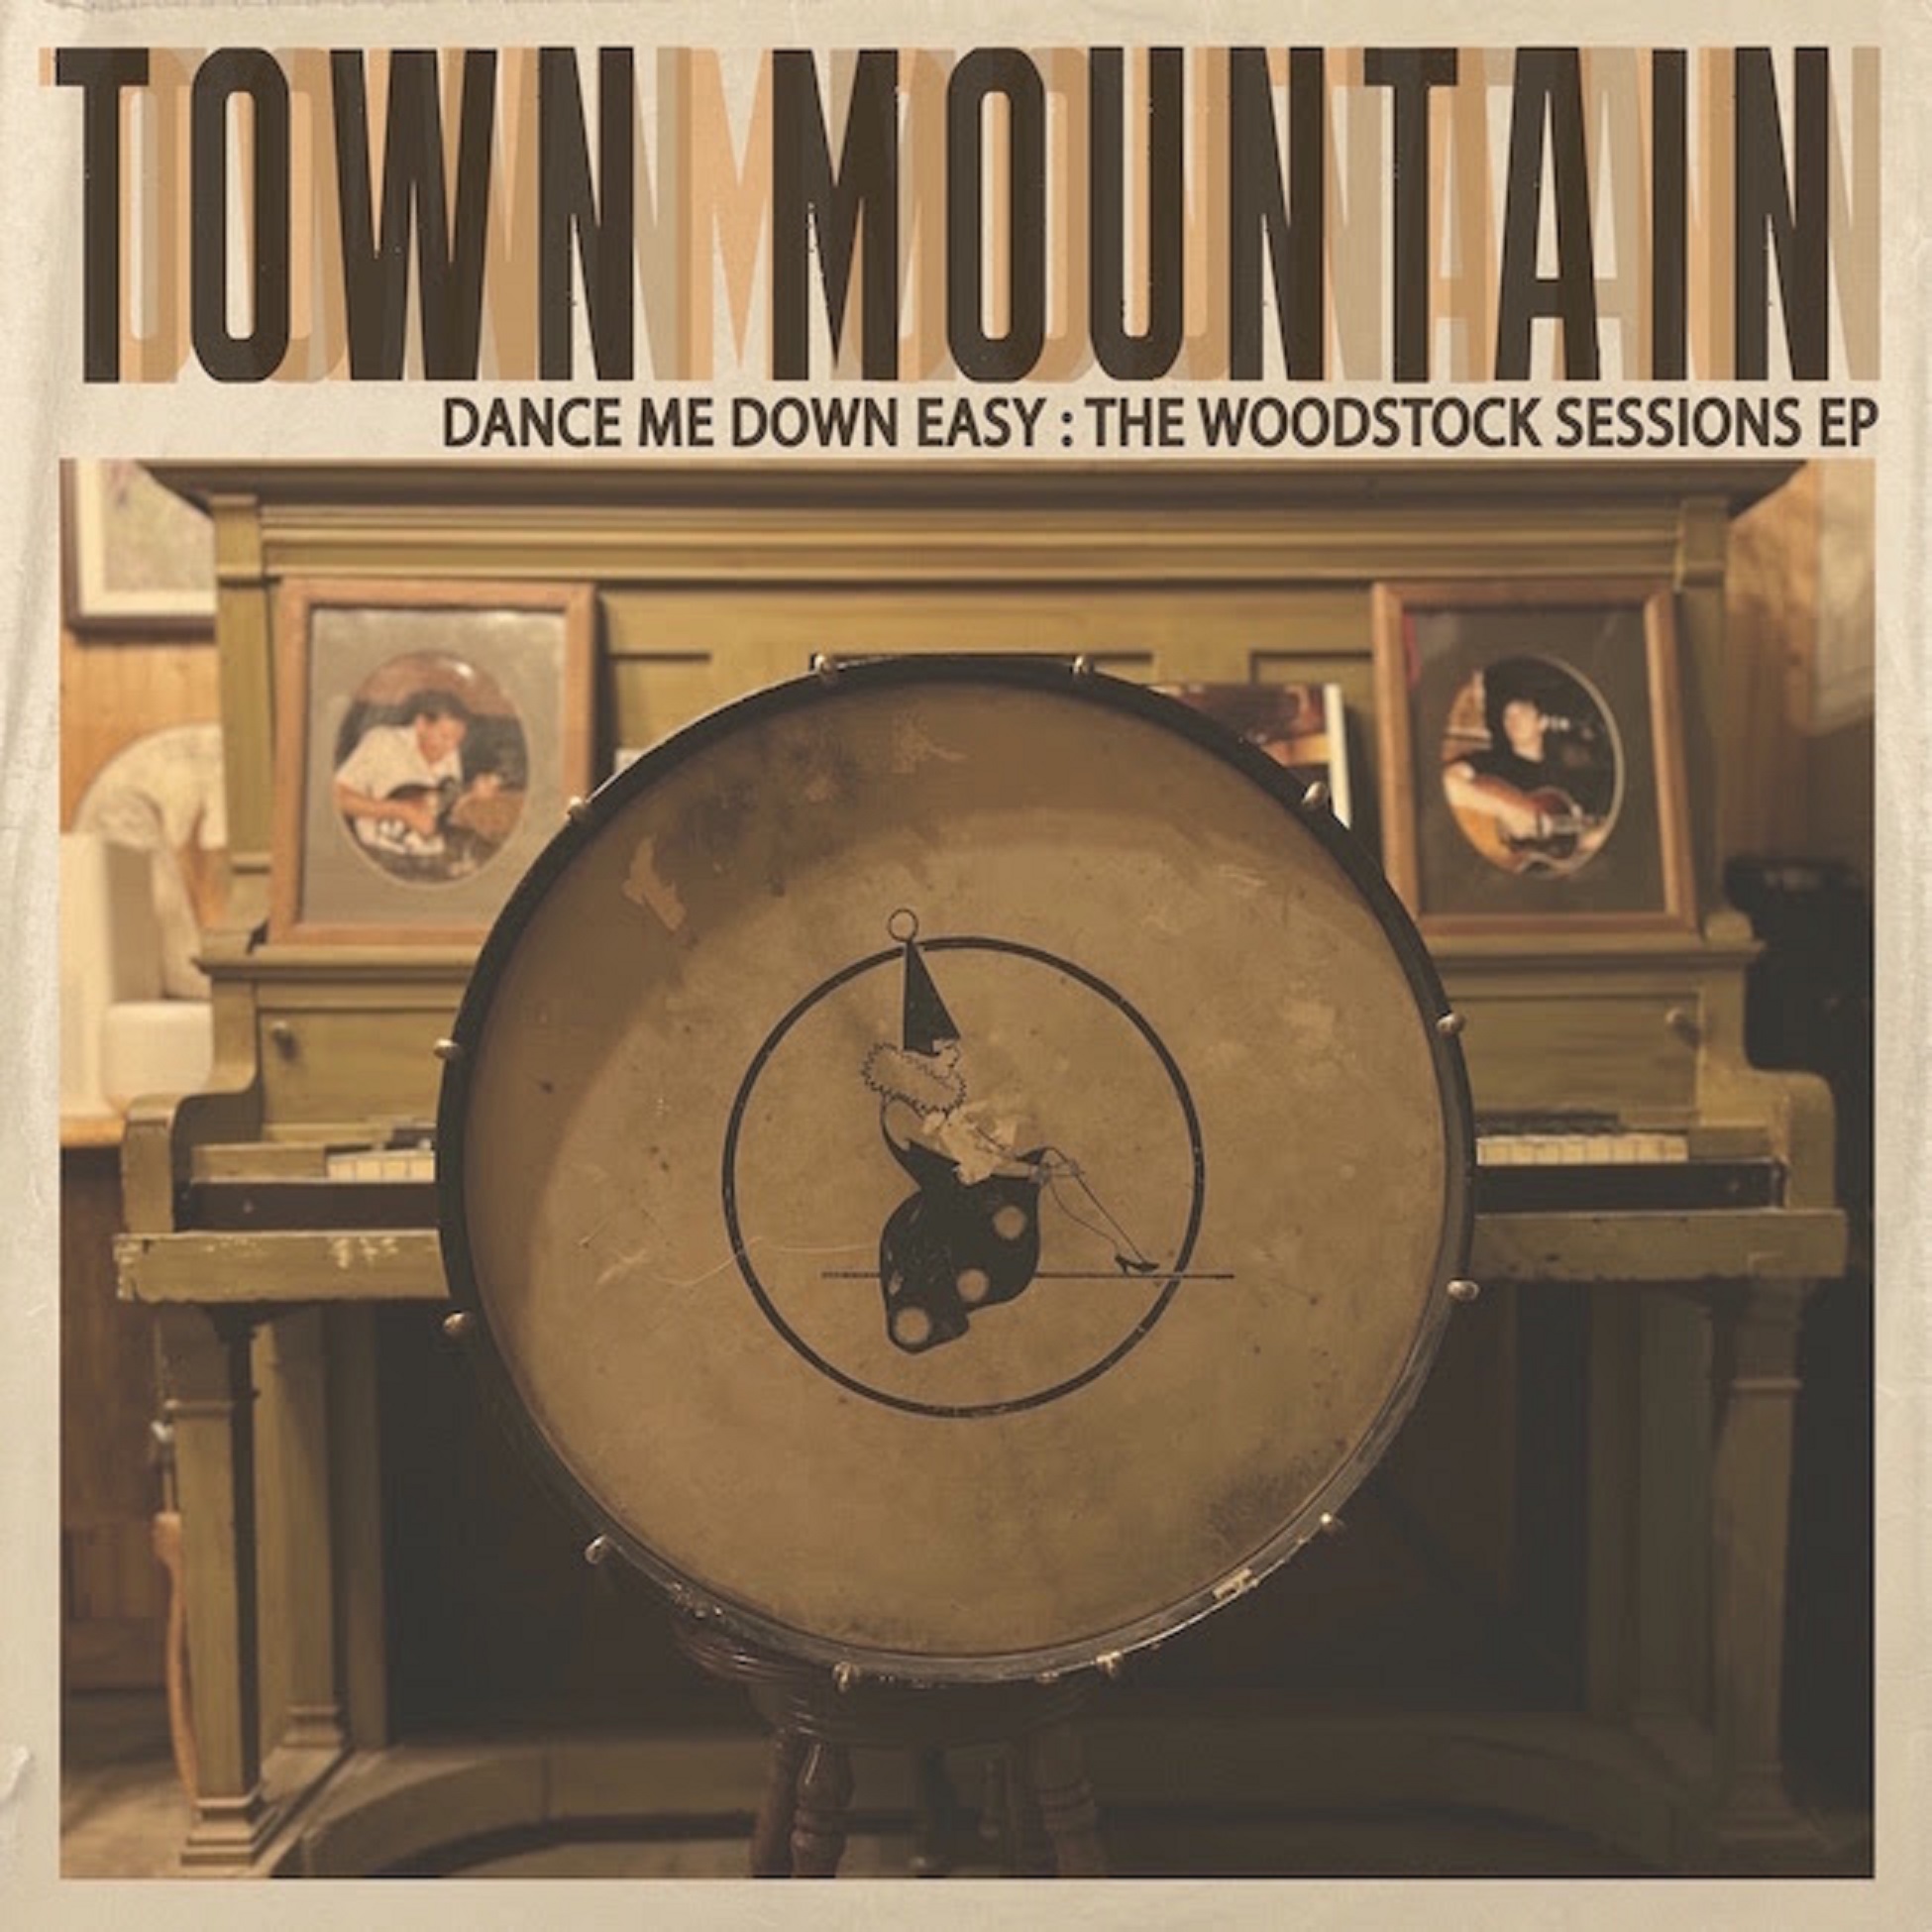 Town Mountain To Release "Dance Me Down Easy: The Woodstock Sessions EP" January 18 Via New West Records